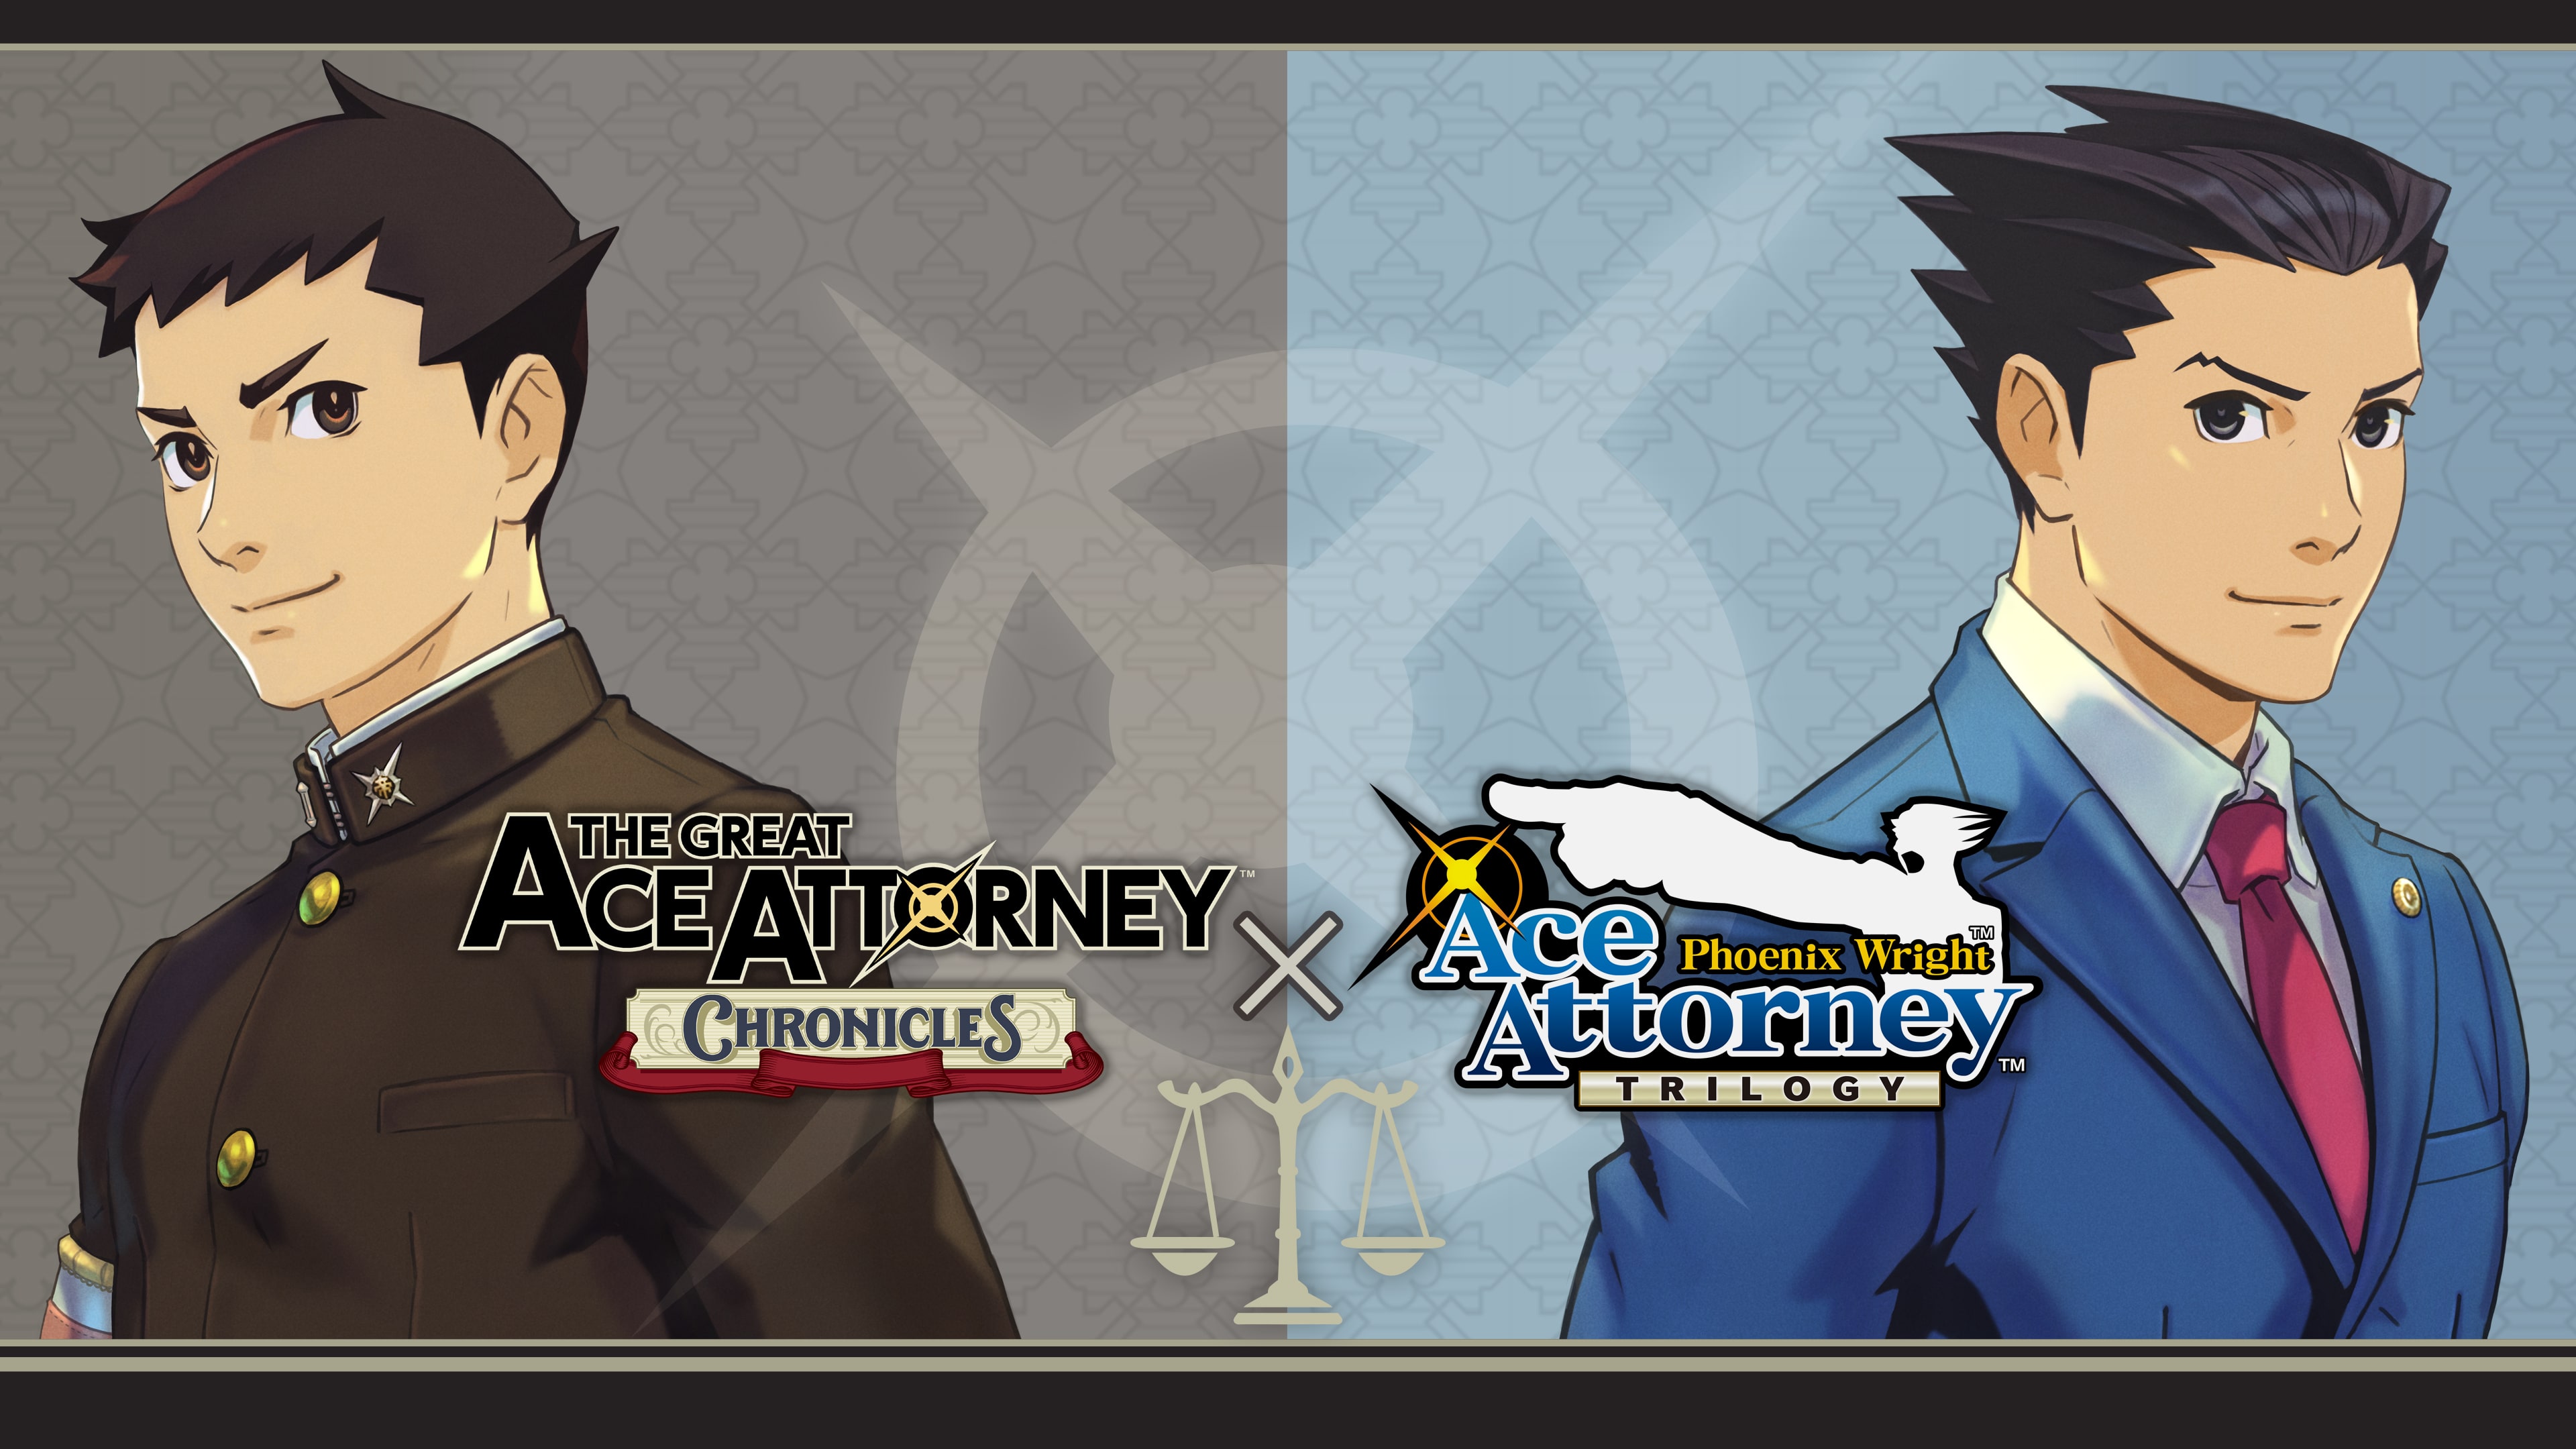 Gamers - The Great Ace Attorney Chronicles 💻 ORDER ONLINE